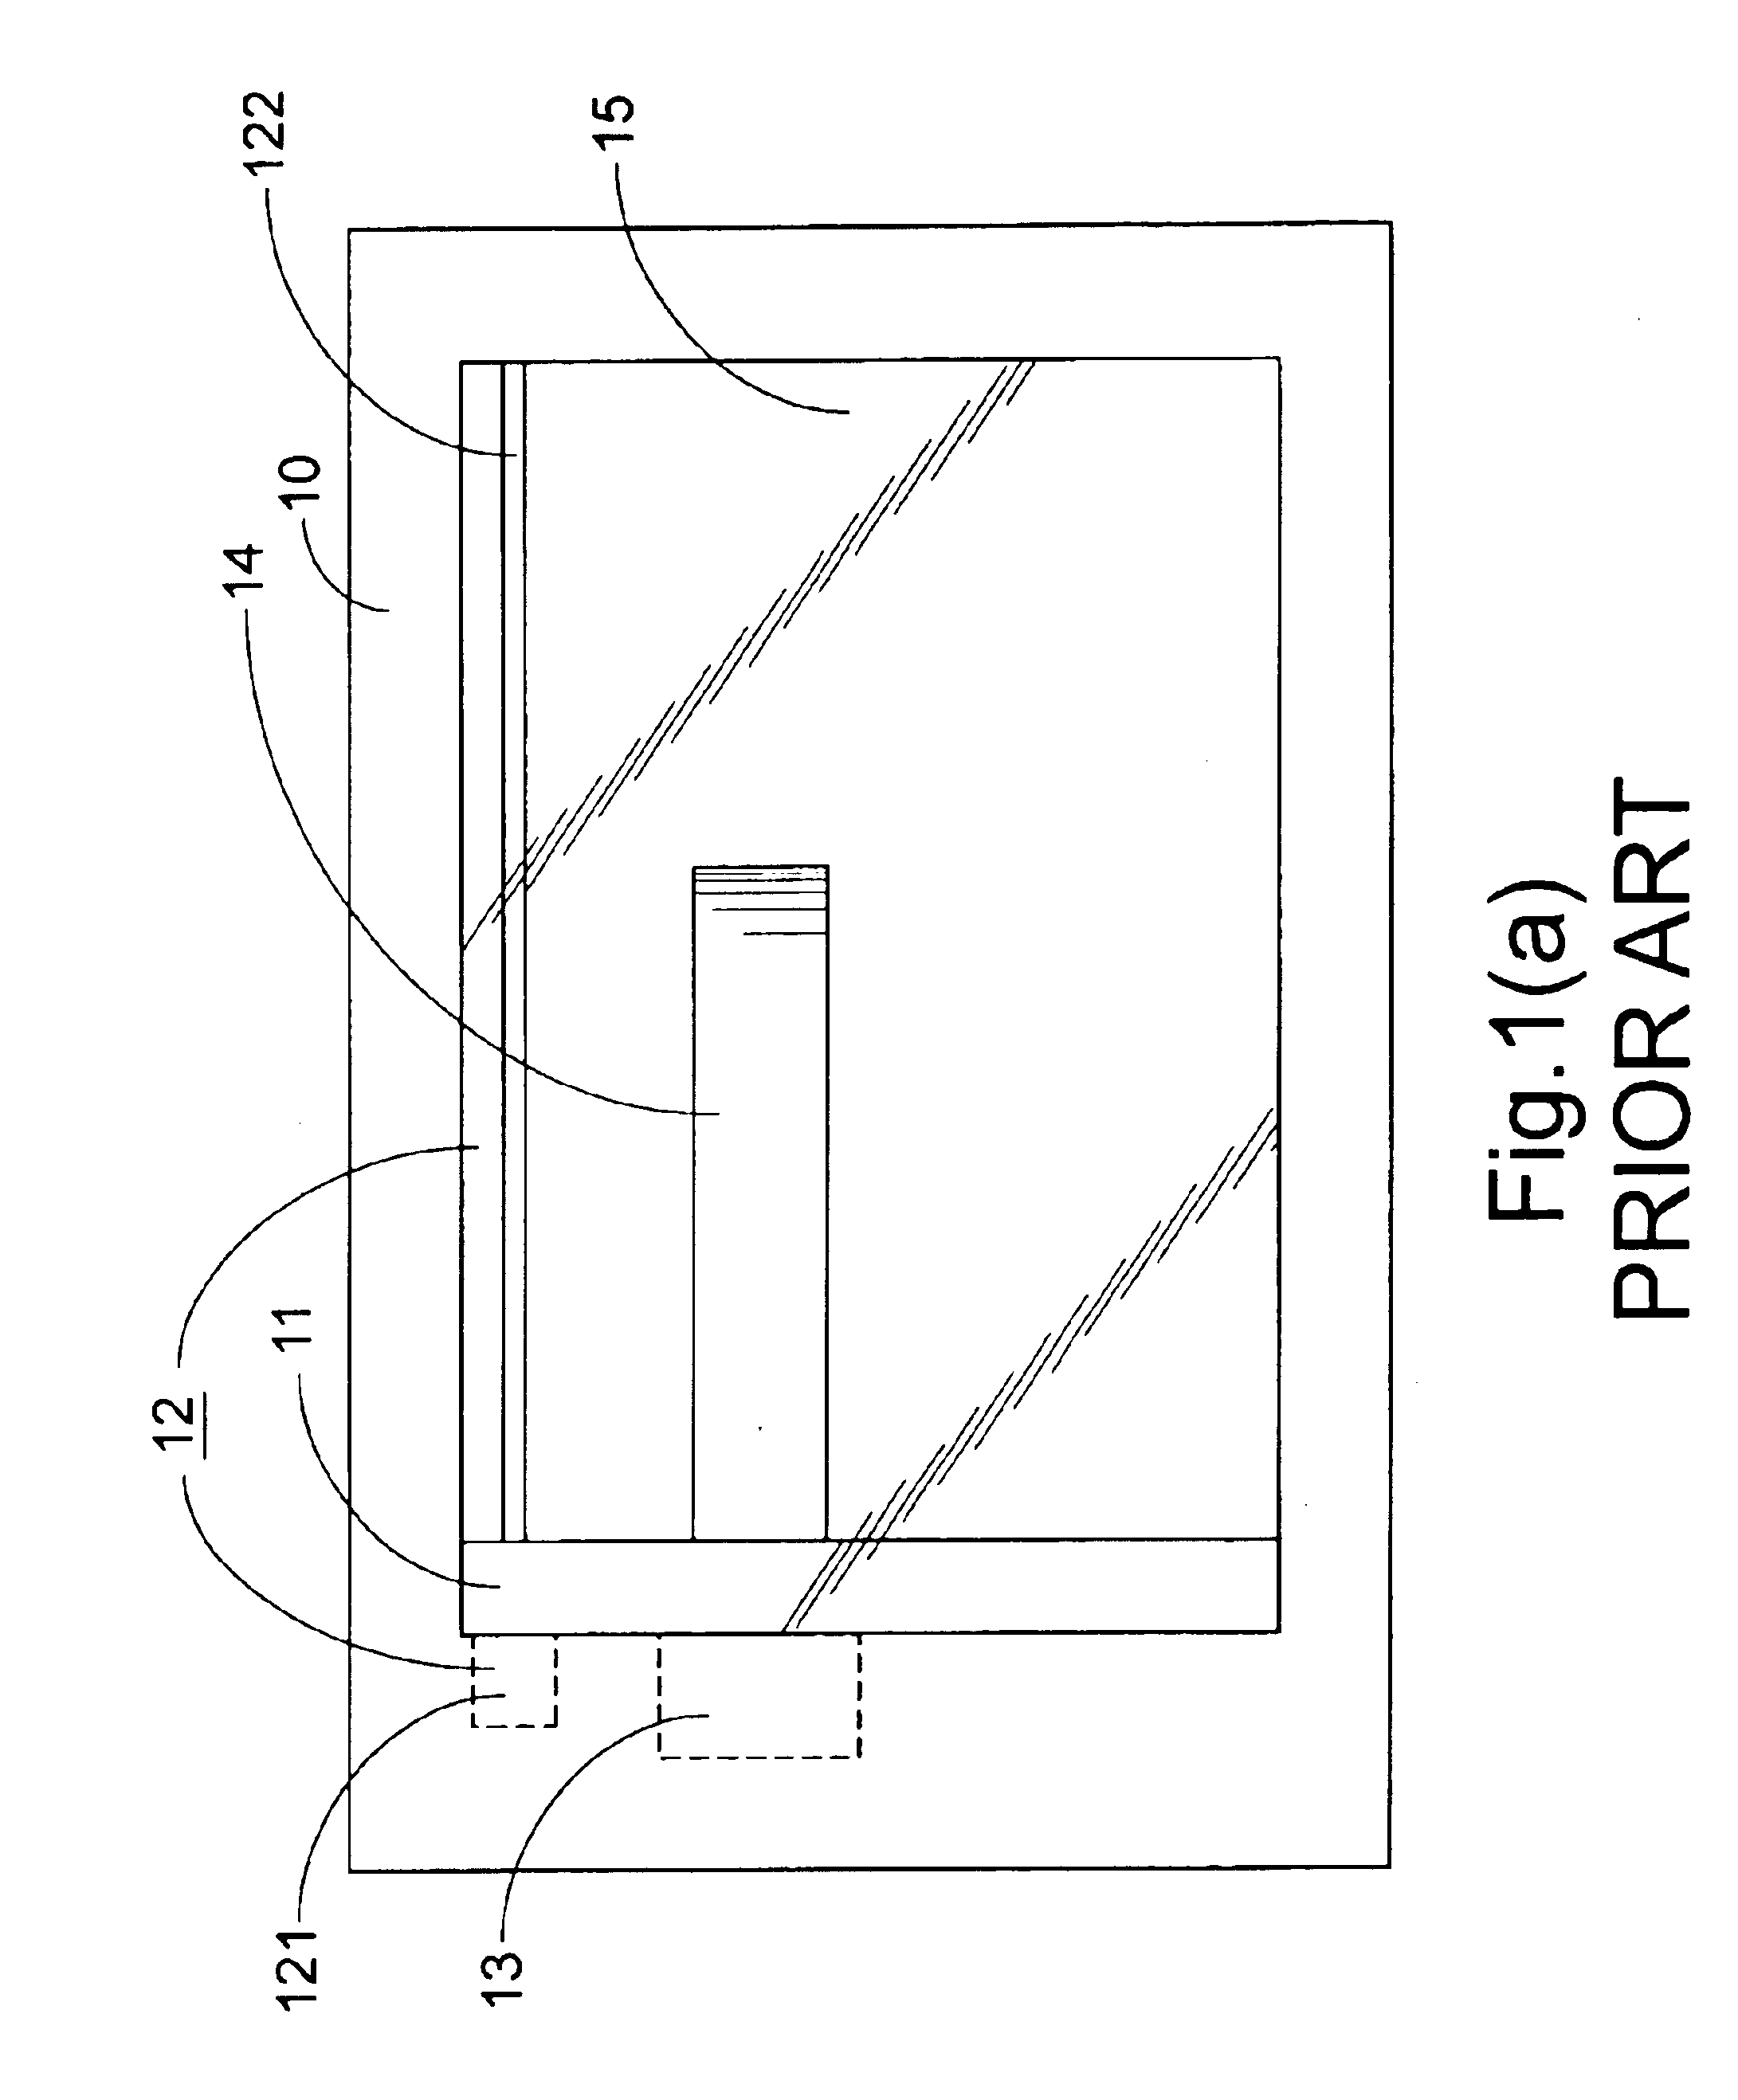 Anti-abrasive mechanism confining flat flexible cable in position in flatbed image scanner